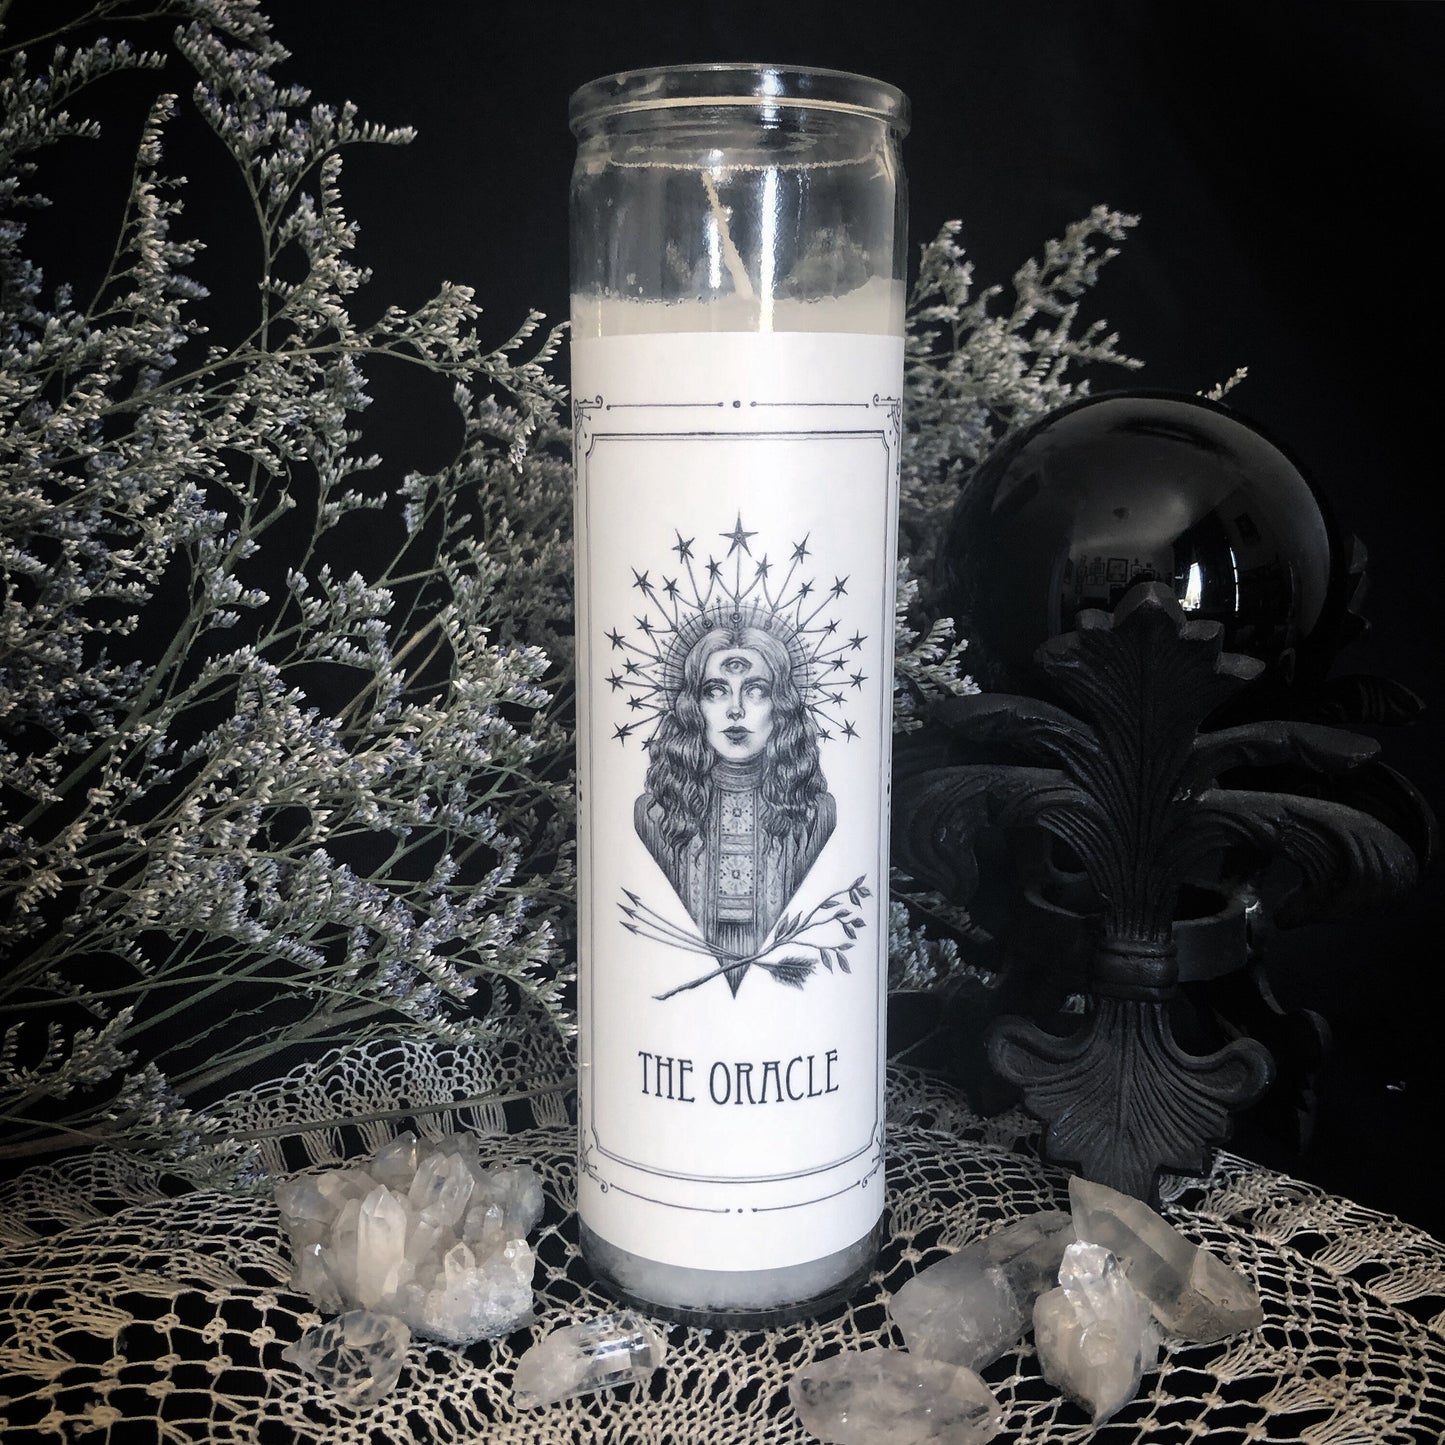 The Oracle Devotional Candle Sticker - 3x6” High Quality Vinyl Sticker